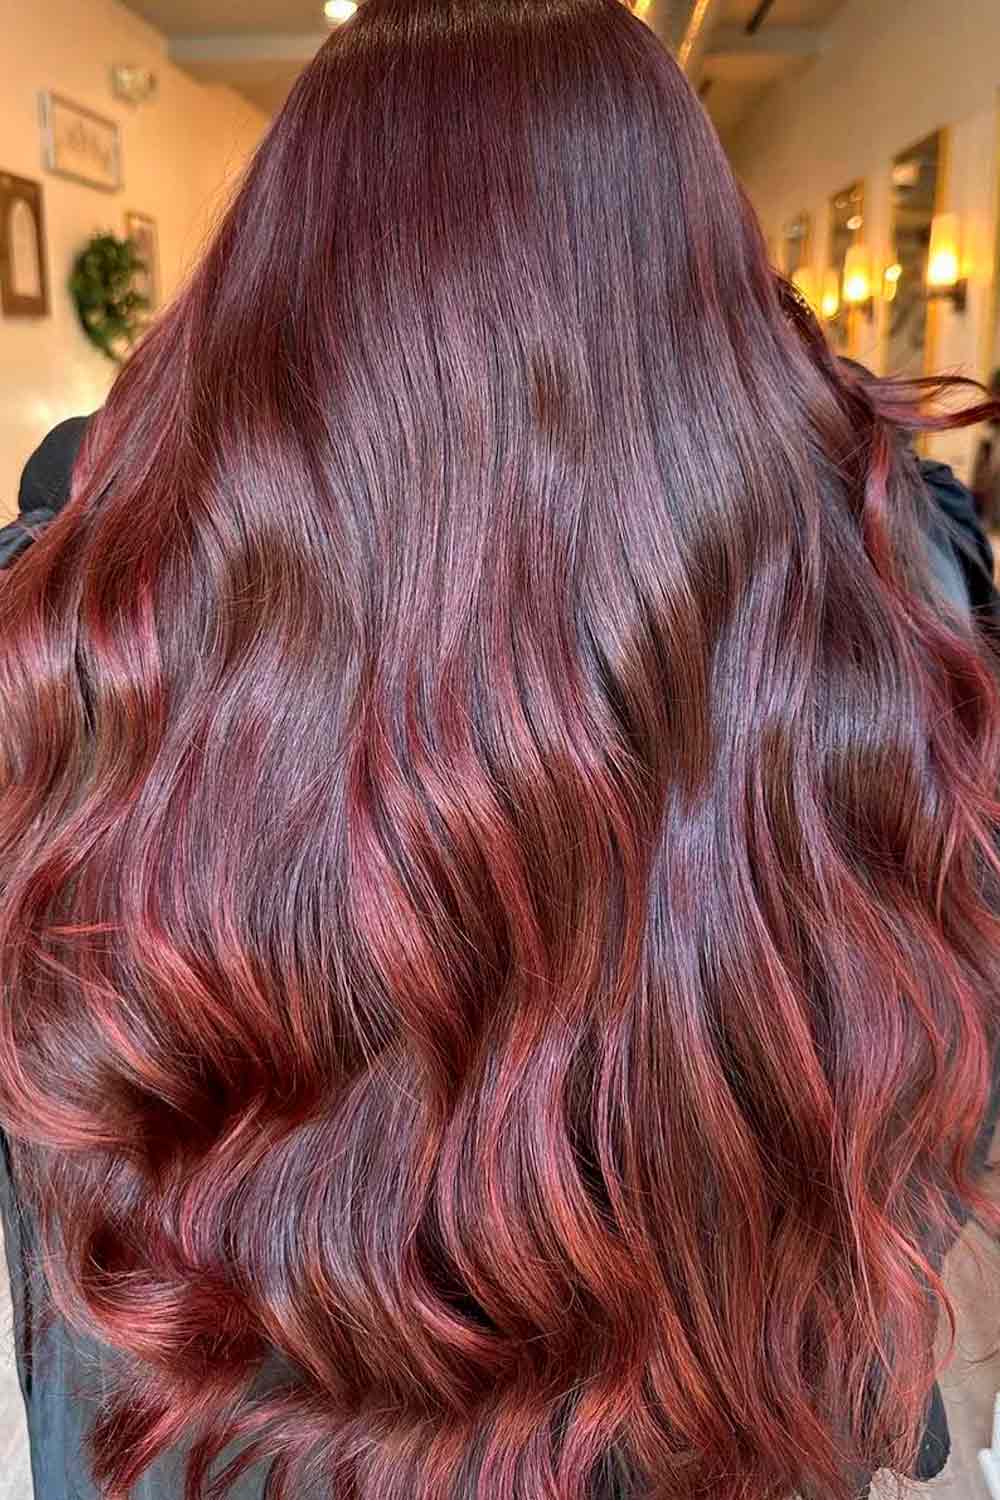 How To Find Your Perfect Auburn Color Shade?